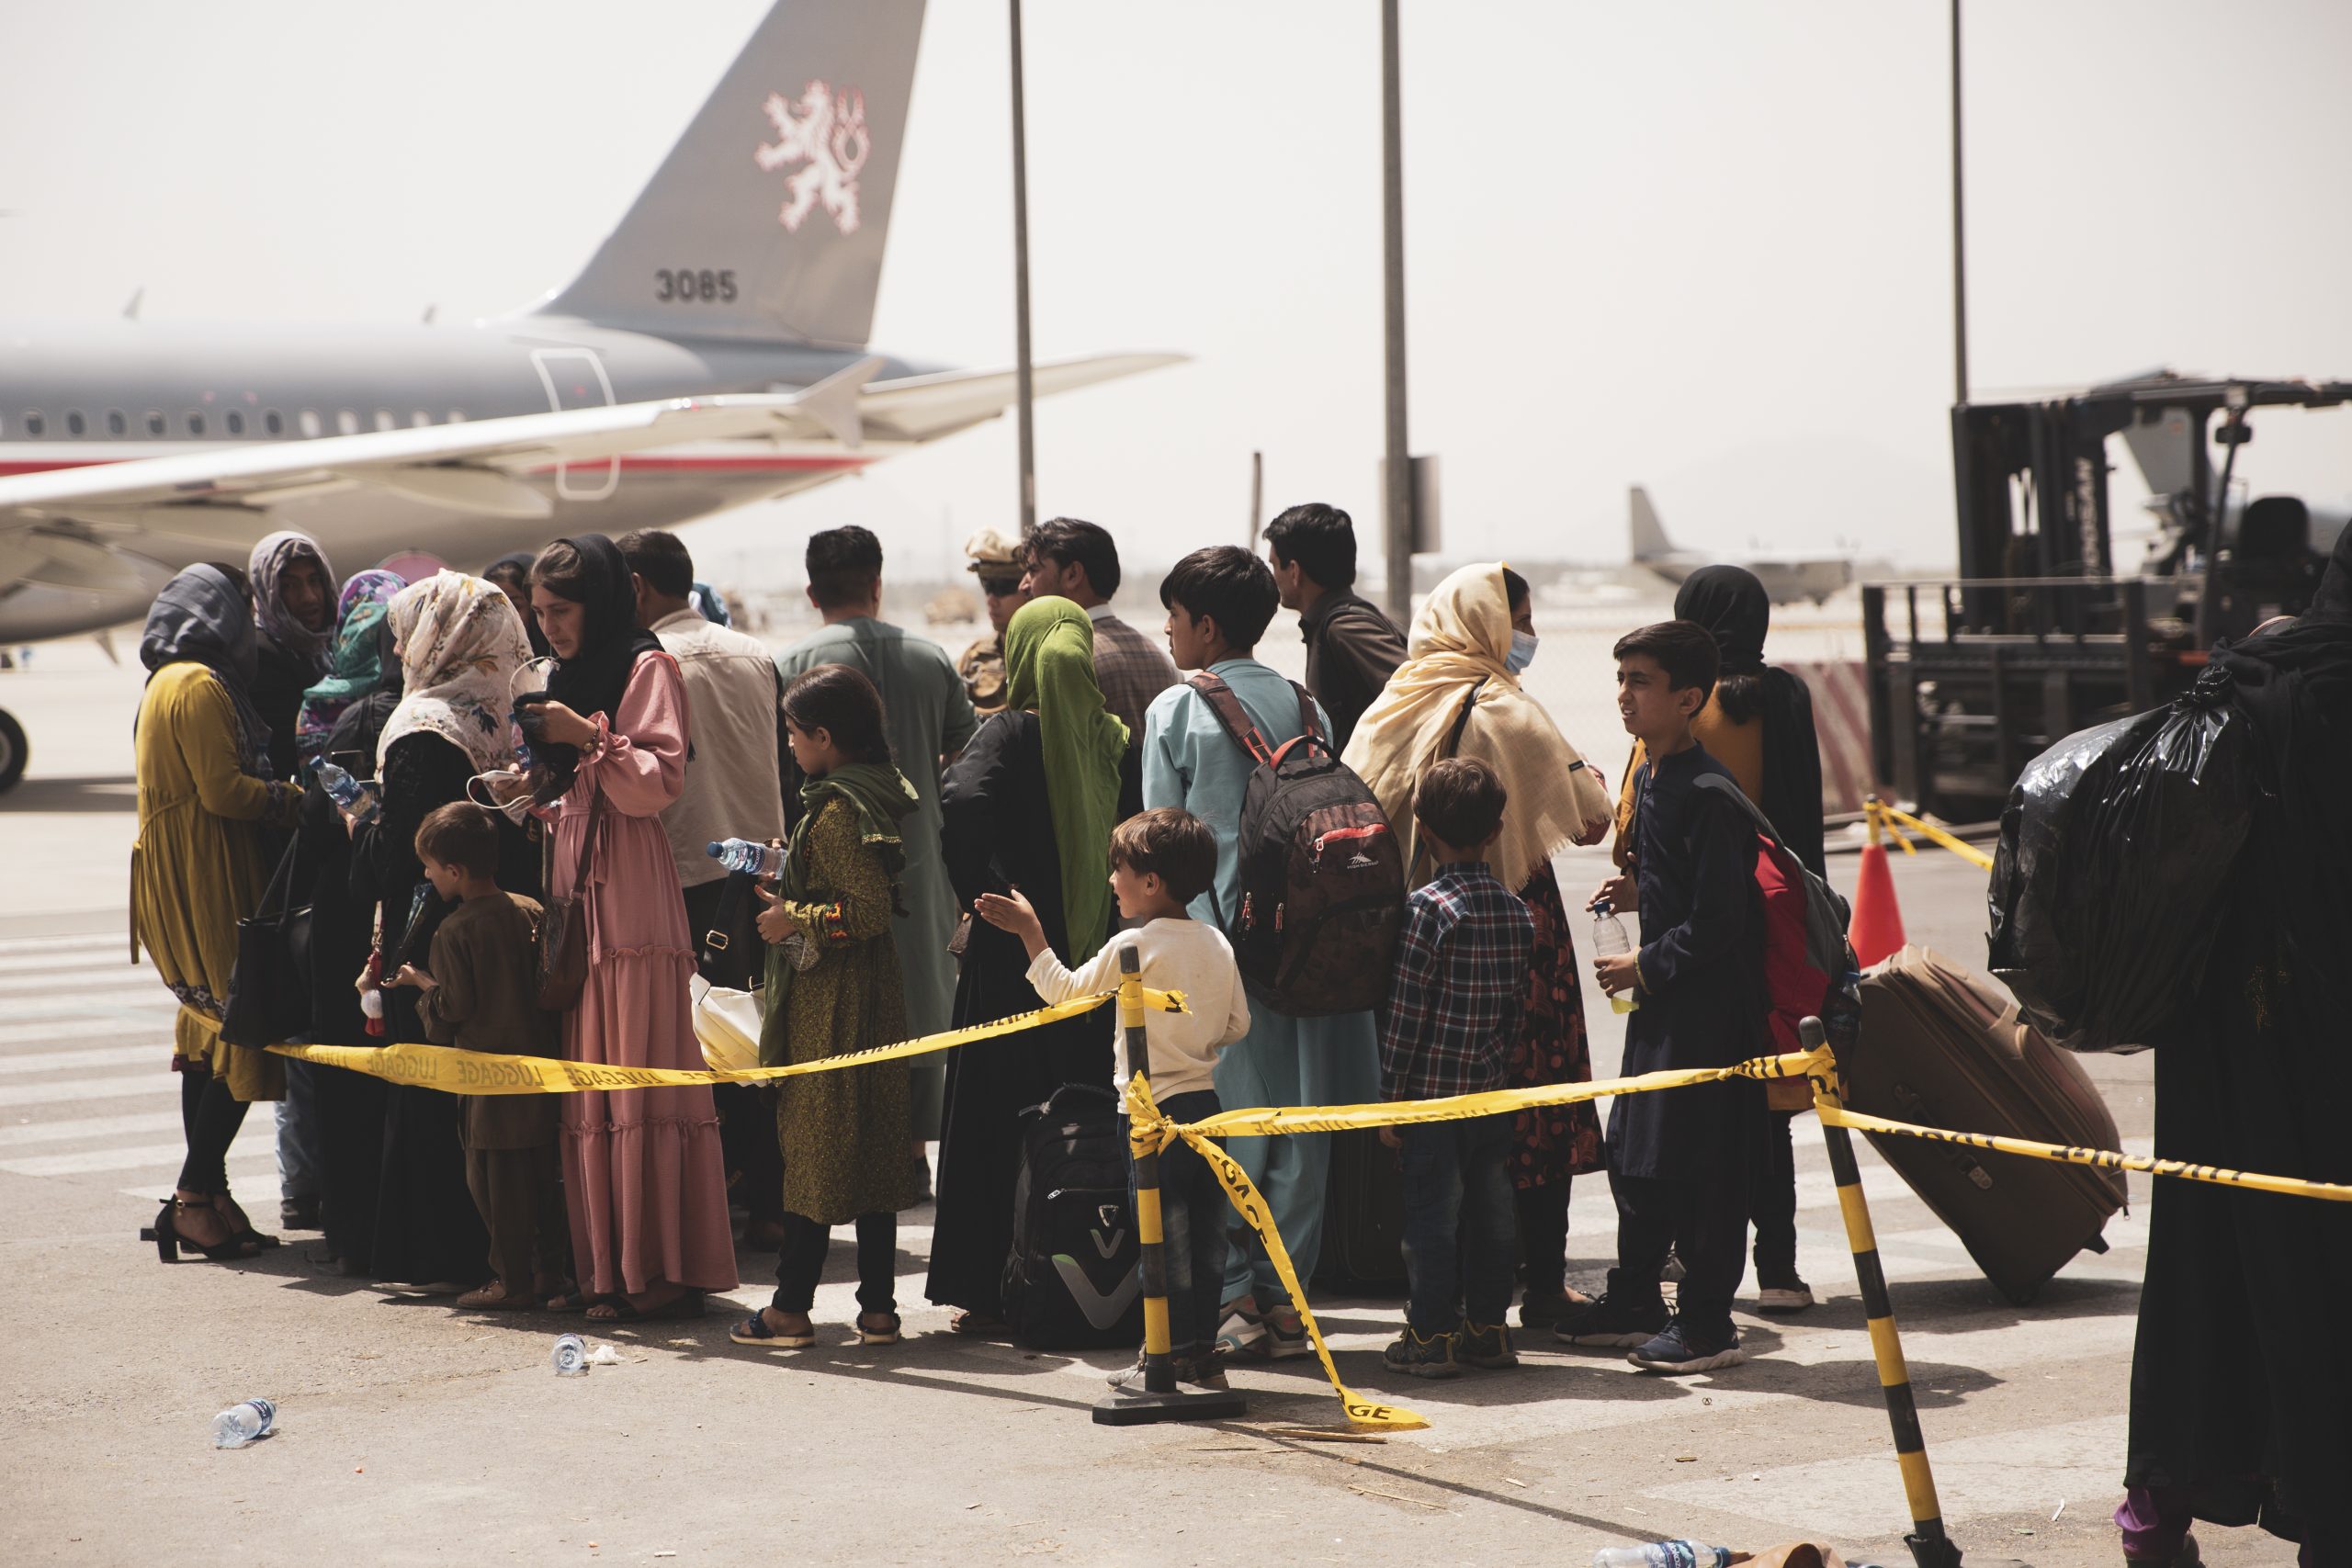 epa09421074 A handout photo made available by US Central Command Public Affairs shows civilians preparing to board a plane during an evacuation at Hamid Karzai International Airport, Kabul, Afghanistan, 18 August 2021 (issued 19 August 2021). US Marines are assisting the Department of State with an orderly drawdown of designated personnel in Afghanistan. (U.S. Marine Corps photo by Staff Sgt. Victor Mancilla)  EPA/Staff Sgt. Victor Mancilla/ US Central Command Public Affairs HO Released By:

LT Robert Mook

Public Affairs Officer

Joint Task Force-Crisis Response

robert.e.mook2.mil@mail.mil HANDOUT EDITORIAL USE ONLY/NO SALES